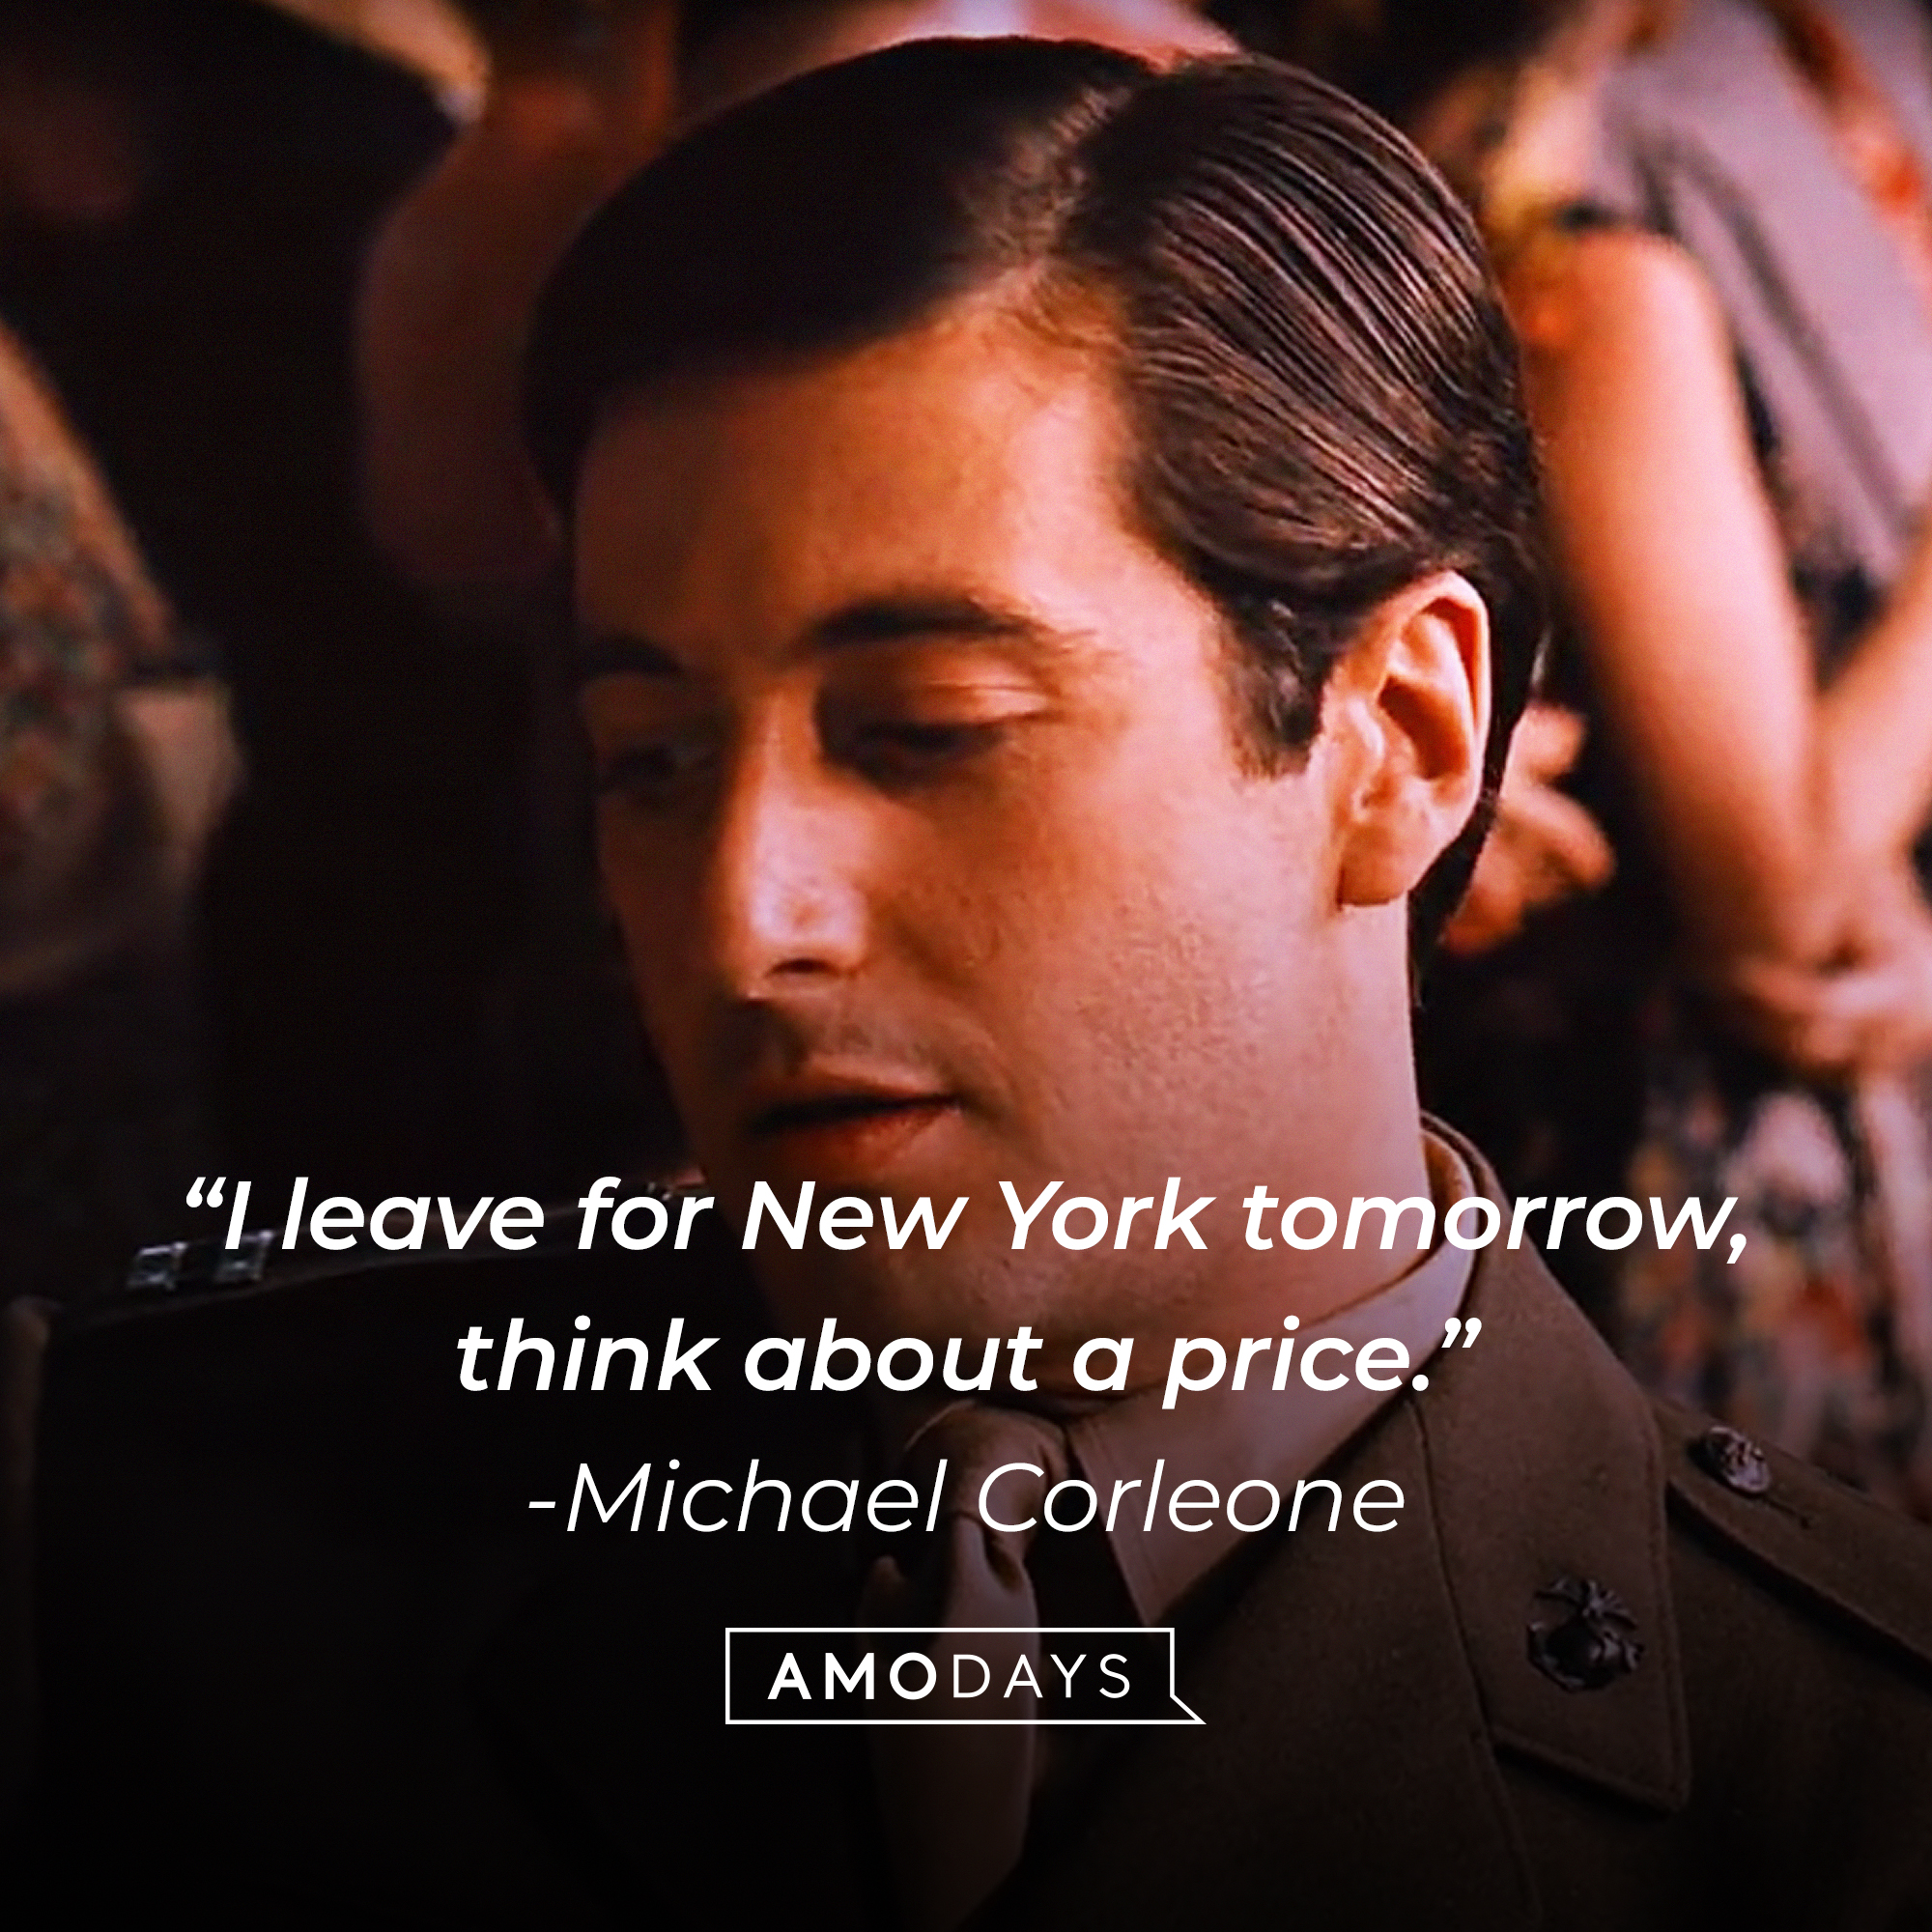 Michael Corleone's quote: "I leave for New York tomorrow, think about a price." | Source: Facebook/thegodfather